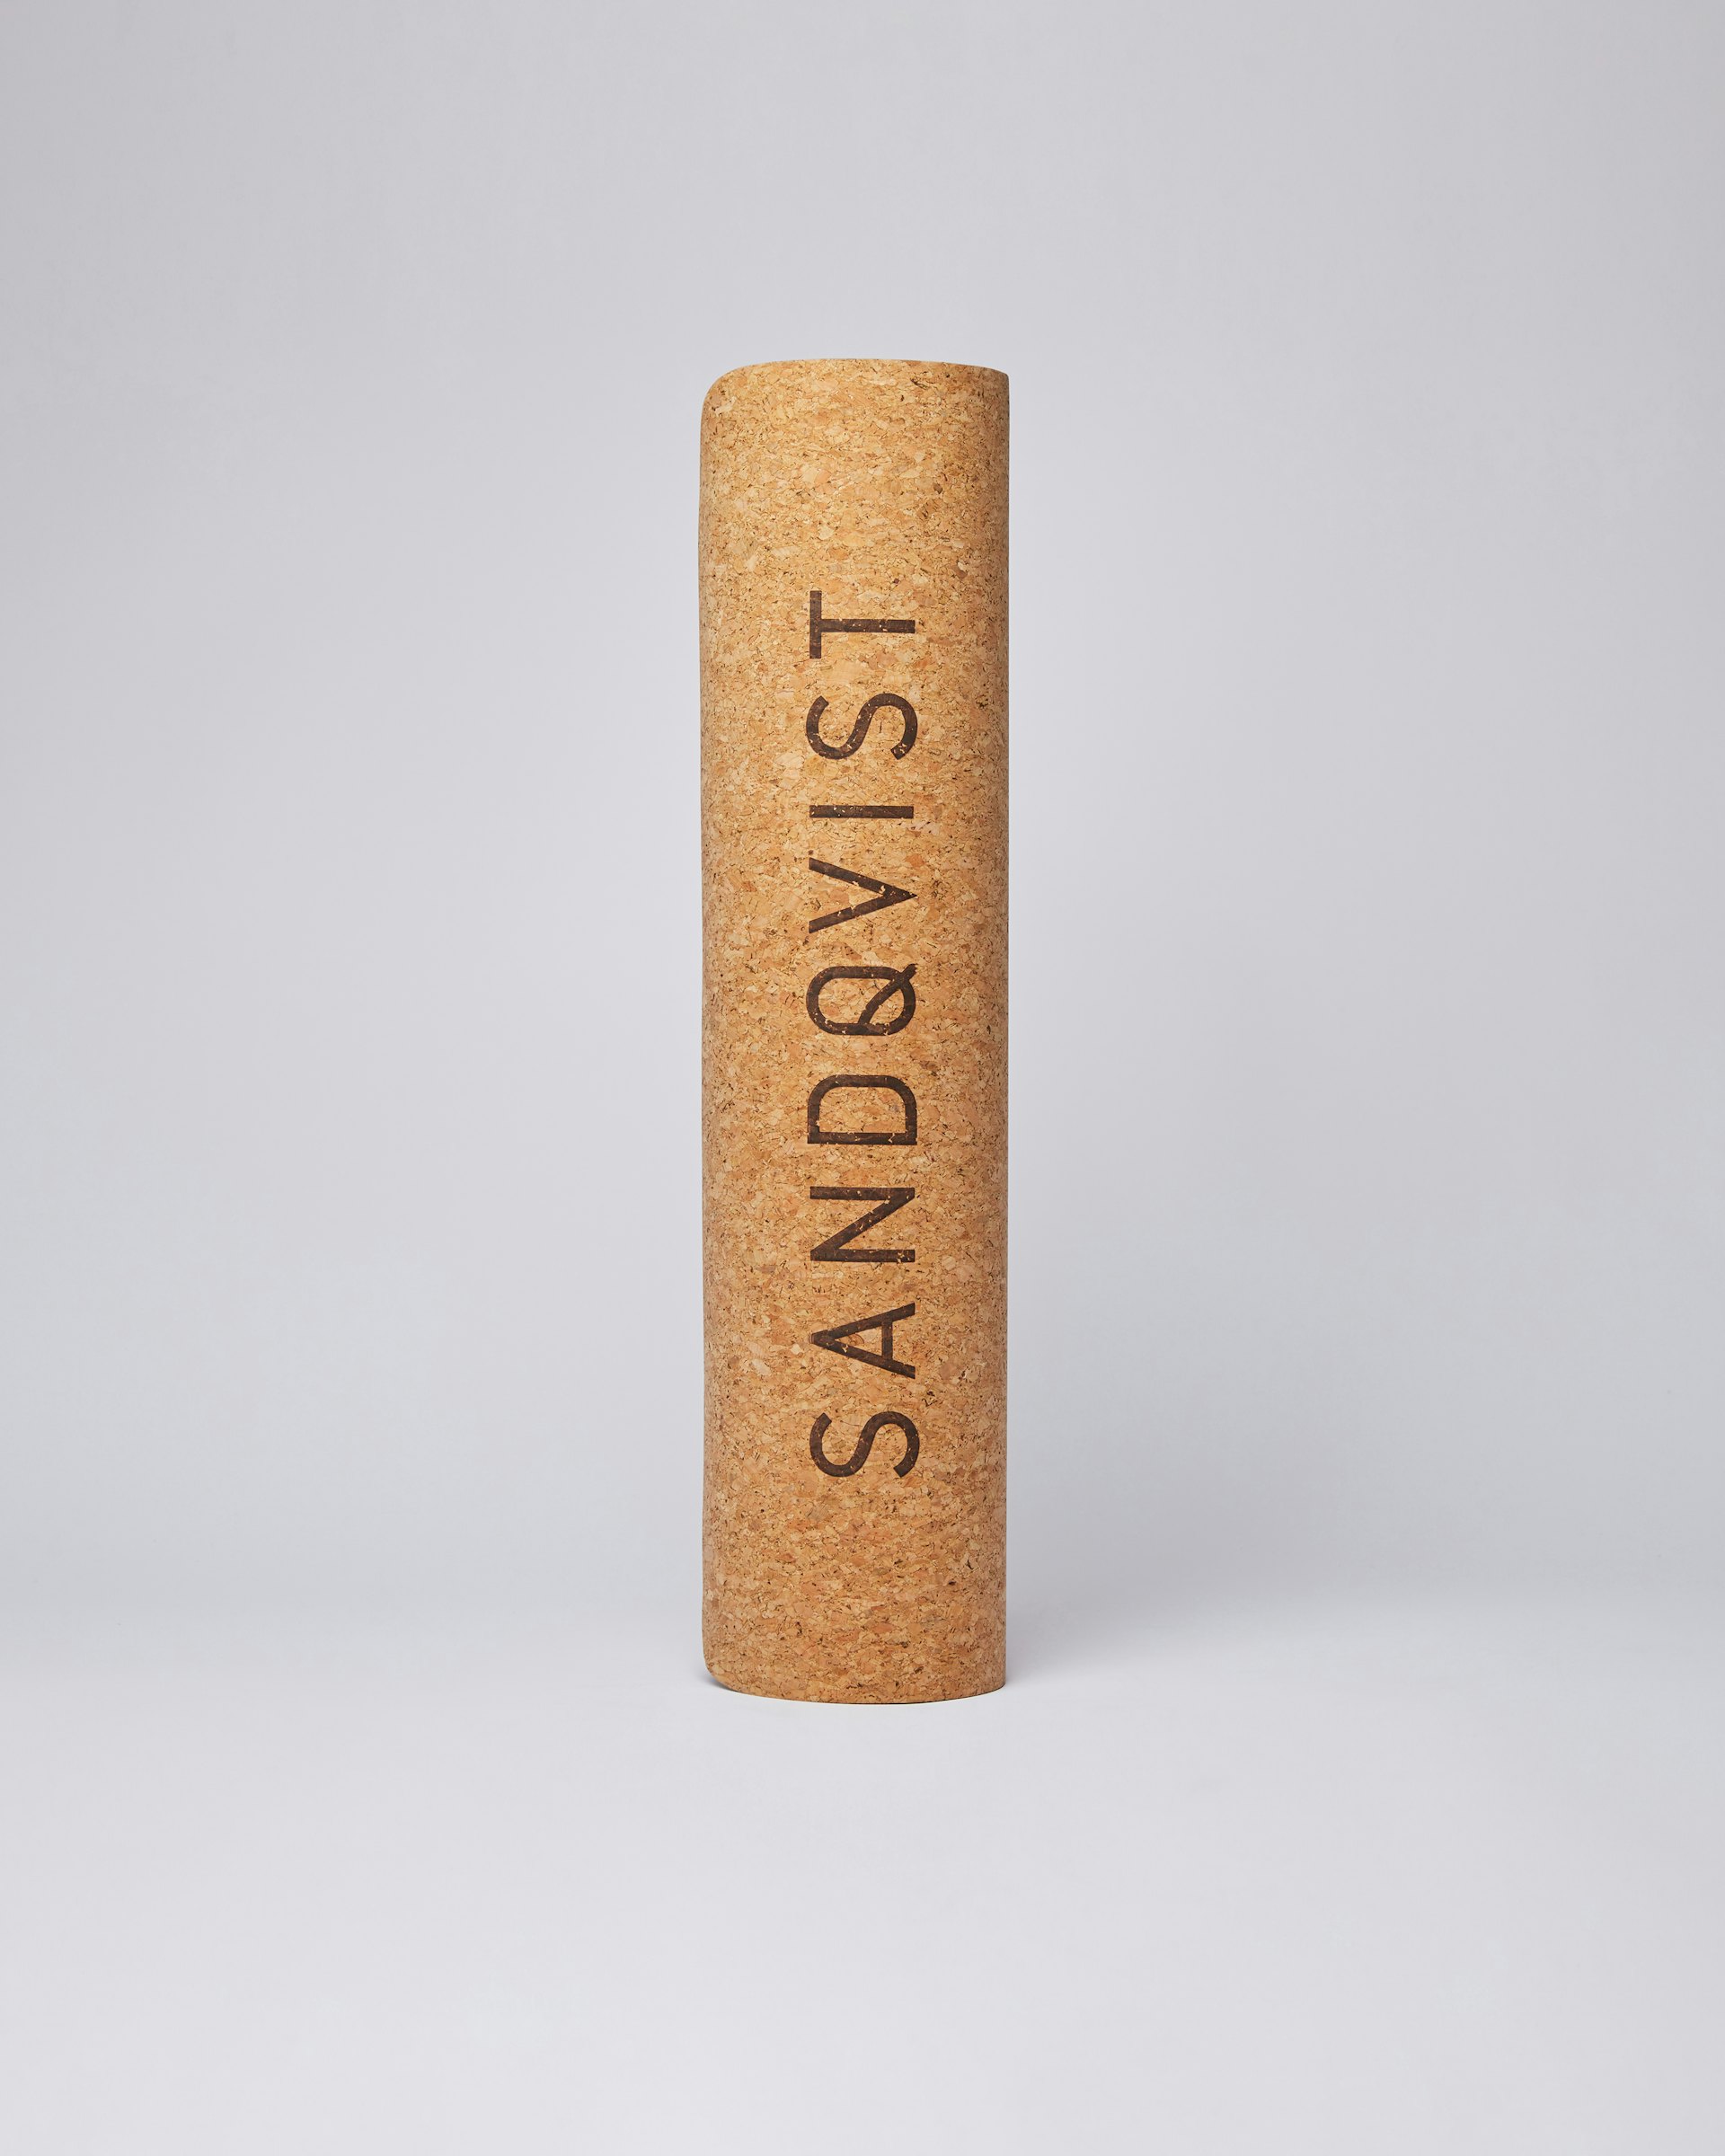 Yoga Mat belongs to the category Items and is in color cork